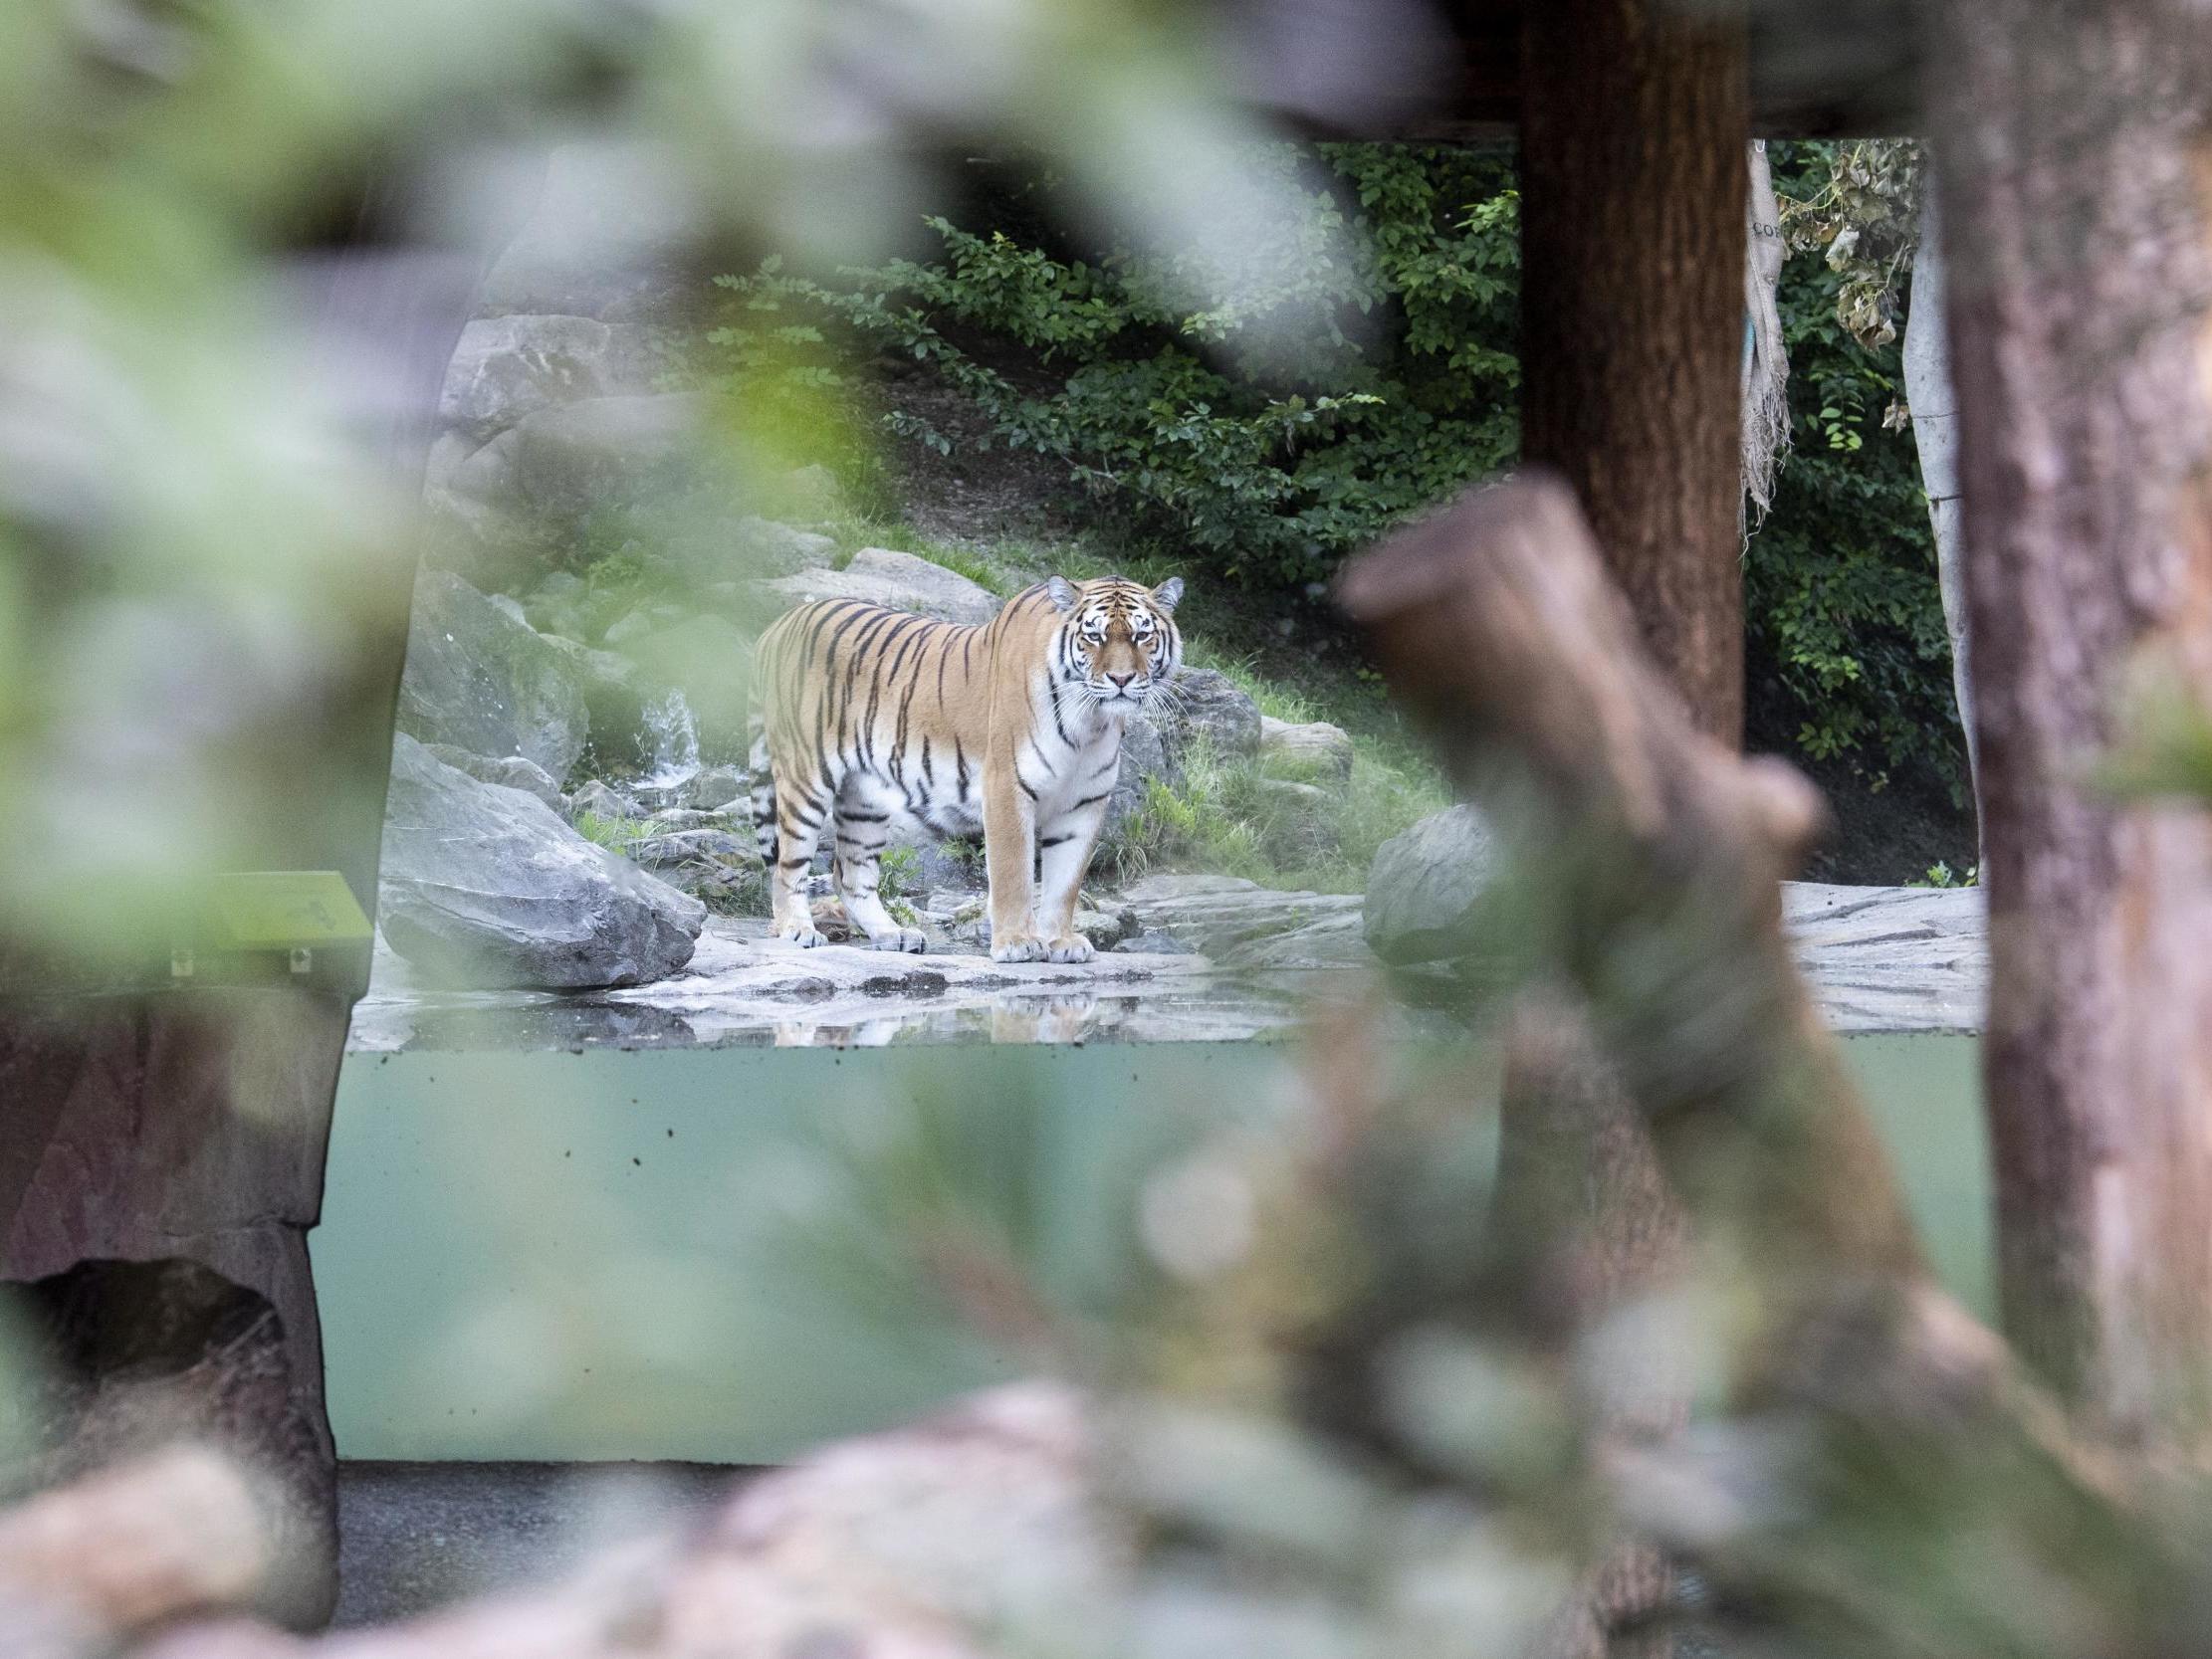 Male Tiger named Sayan in Zoo Zurich after the accident in the tiger enclosure where a keeper was killed